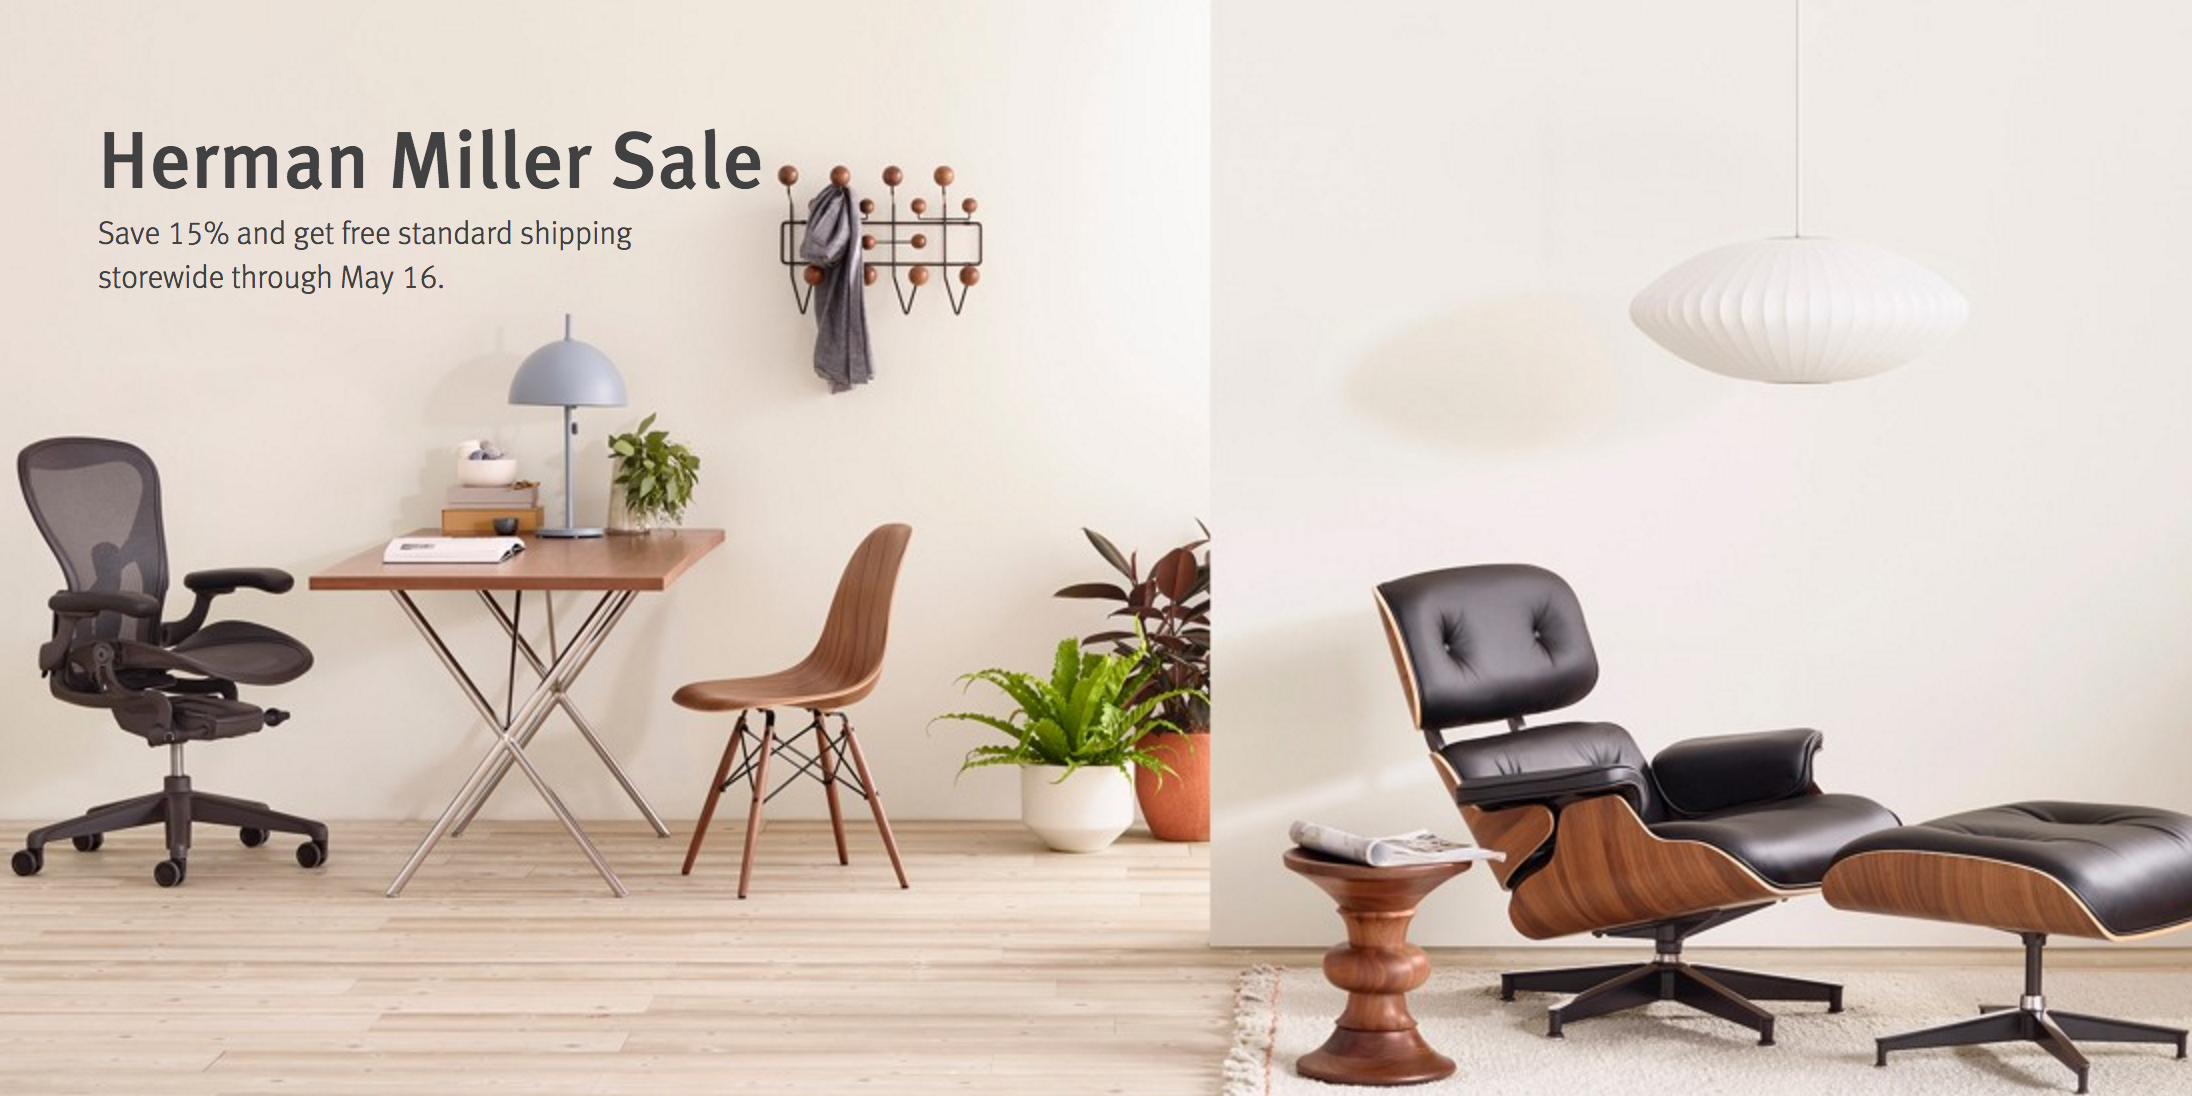 Herman Miller 15 off sale delivers rare discounts, free shipping